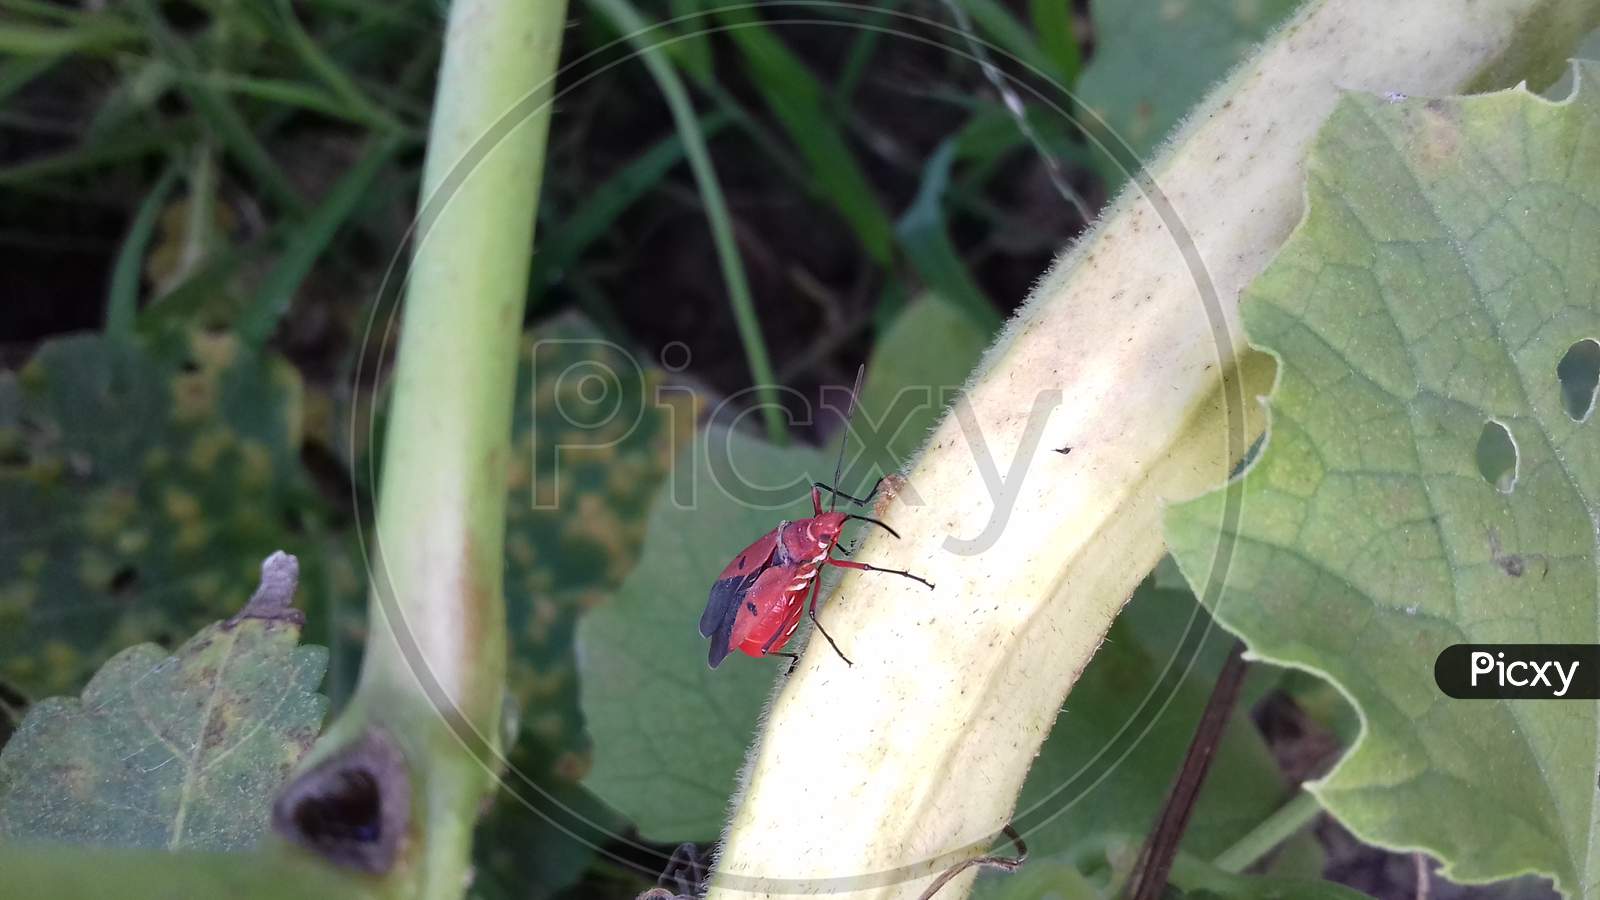 Red Insects in garden.